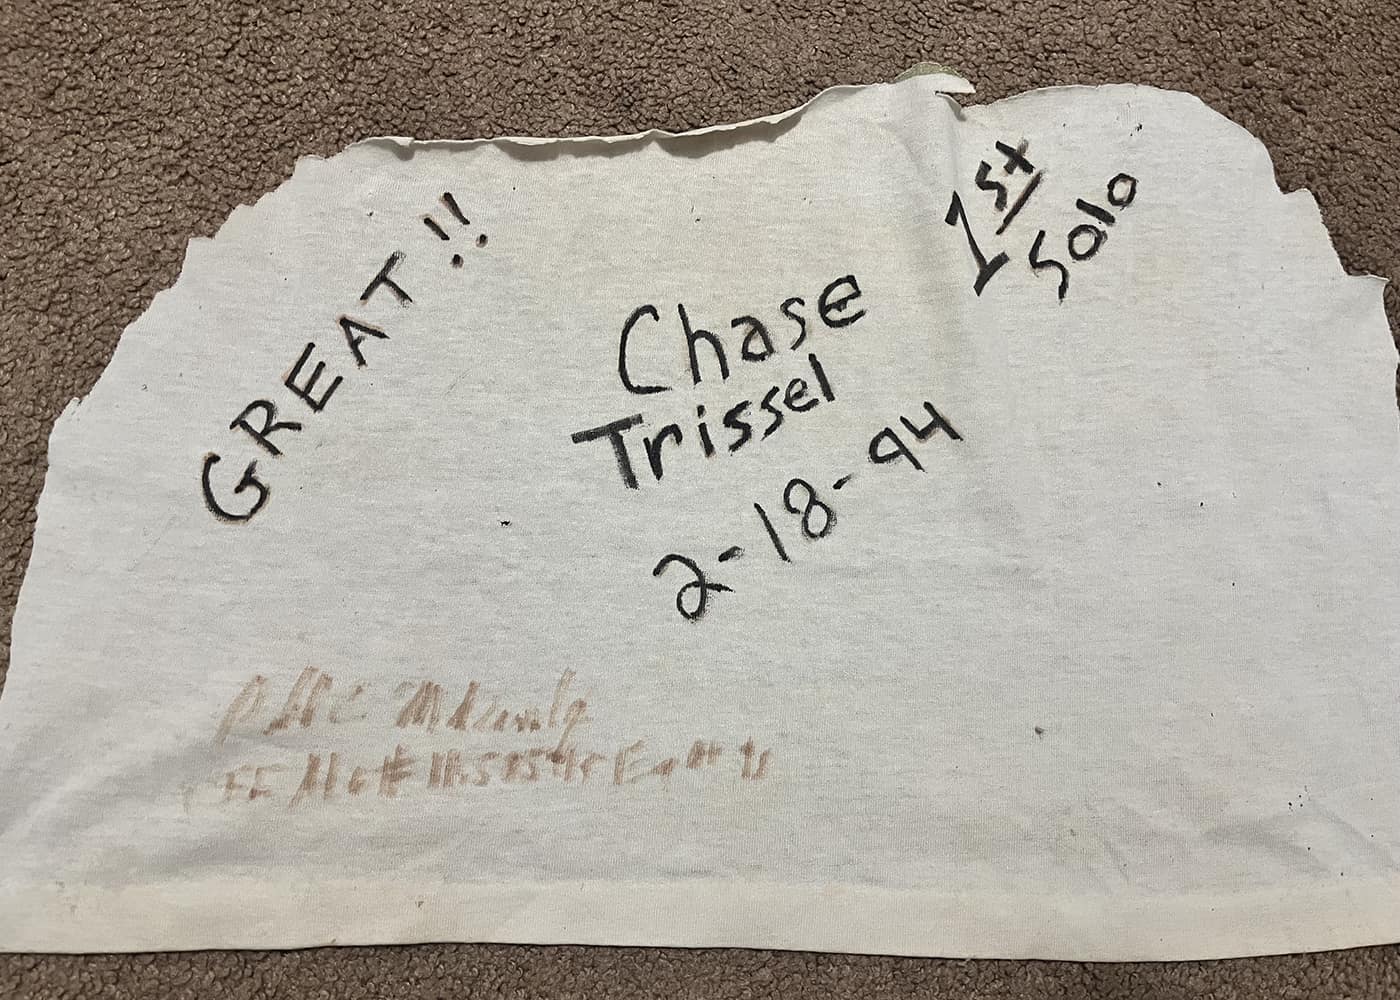 Following a long aviation tradition, a cut-out portion of a T-shirt tail marked Chase Trissel’s first solo flight in 1994. (Photo: Chase Trissel)